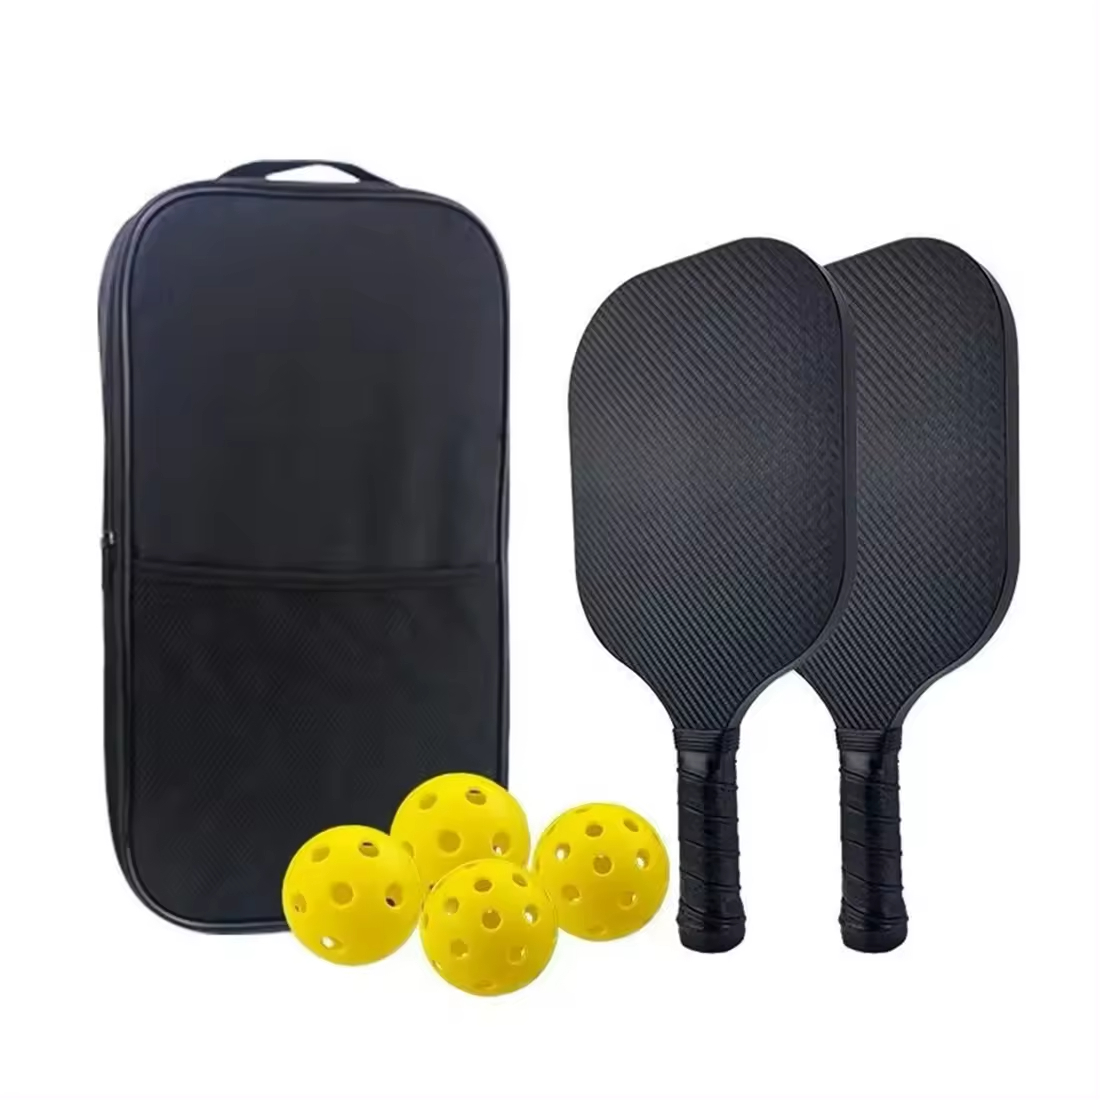 USAPA Professional Edgeless Pickleball Paddle Carbon Fiber with High Grit Spin Frosted Surface for High Performance